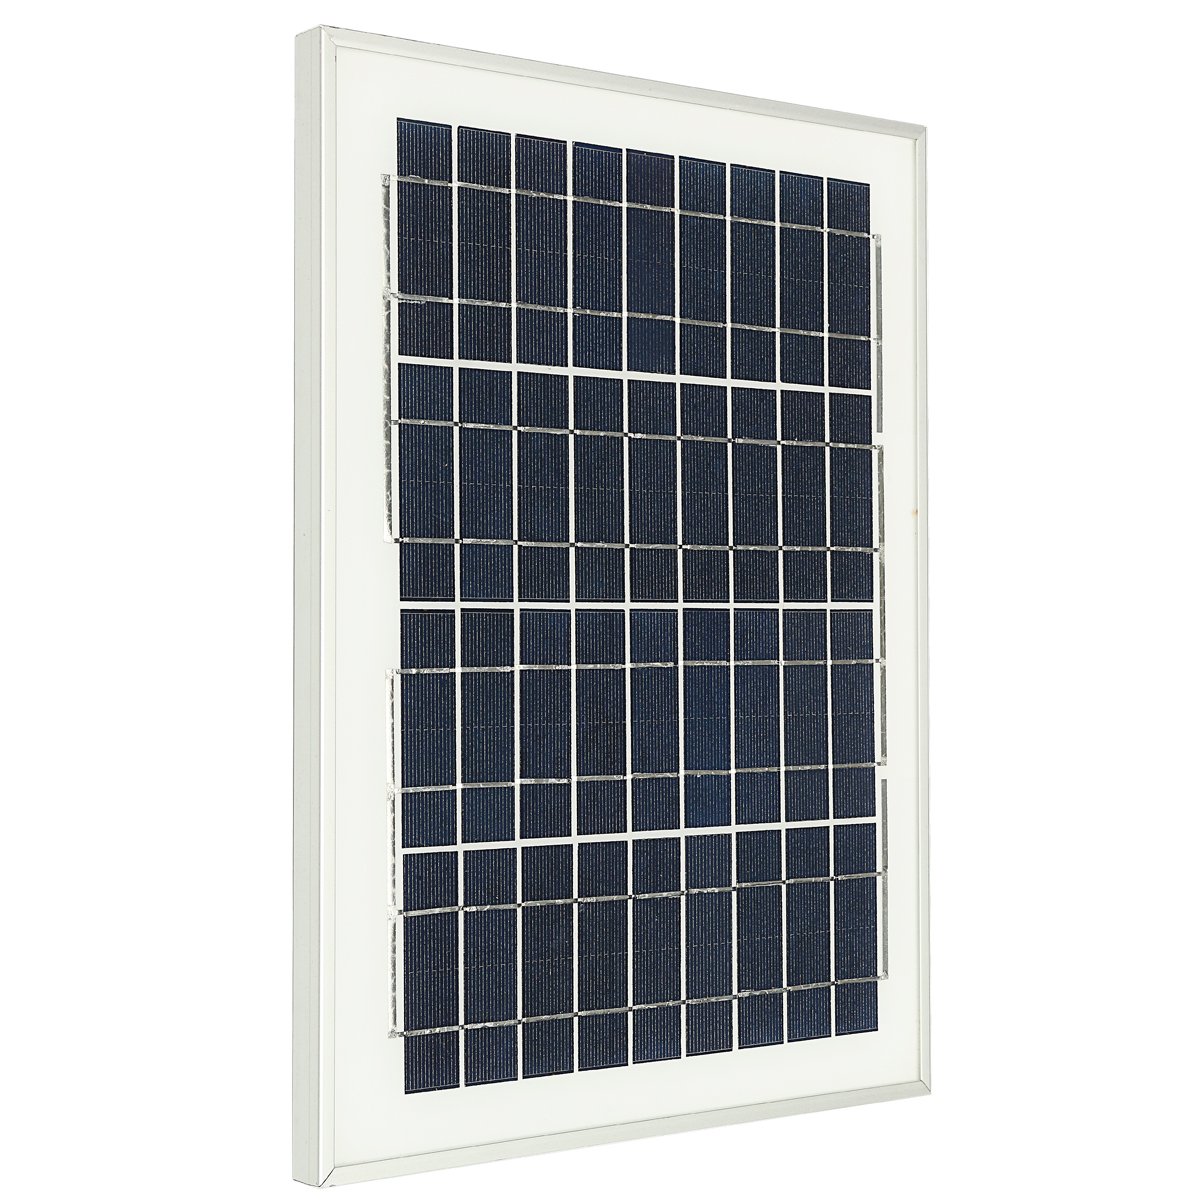 18V 10W Solar Panel For Outdoor Fountain Pond Pool Garden Submersible Water Pump With Crocodile Thre 1